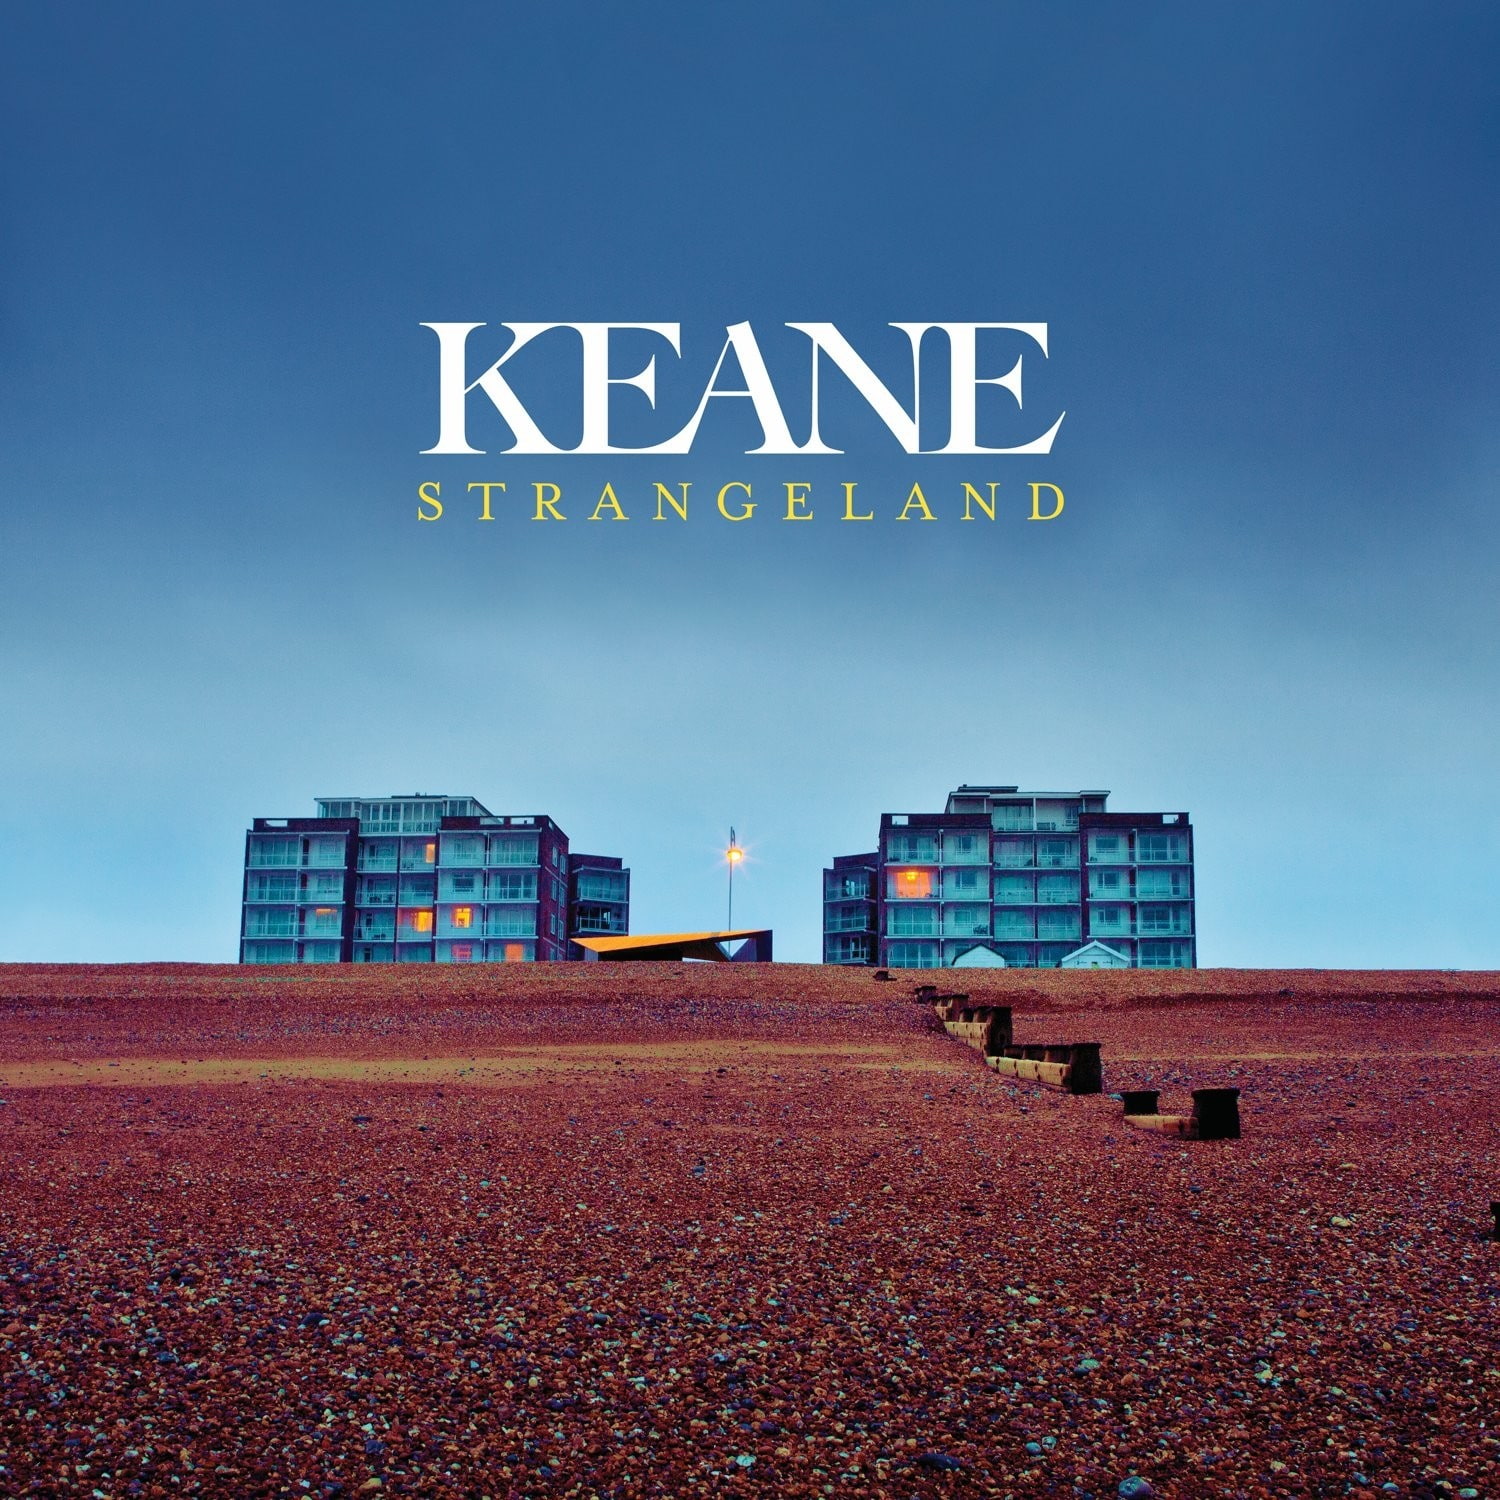 keane album covers, sky, text, communication, sign, nature